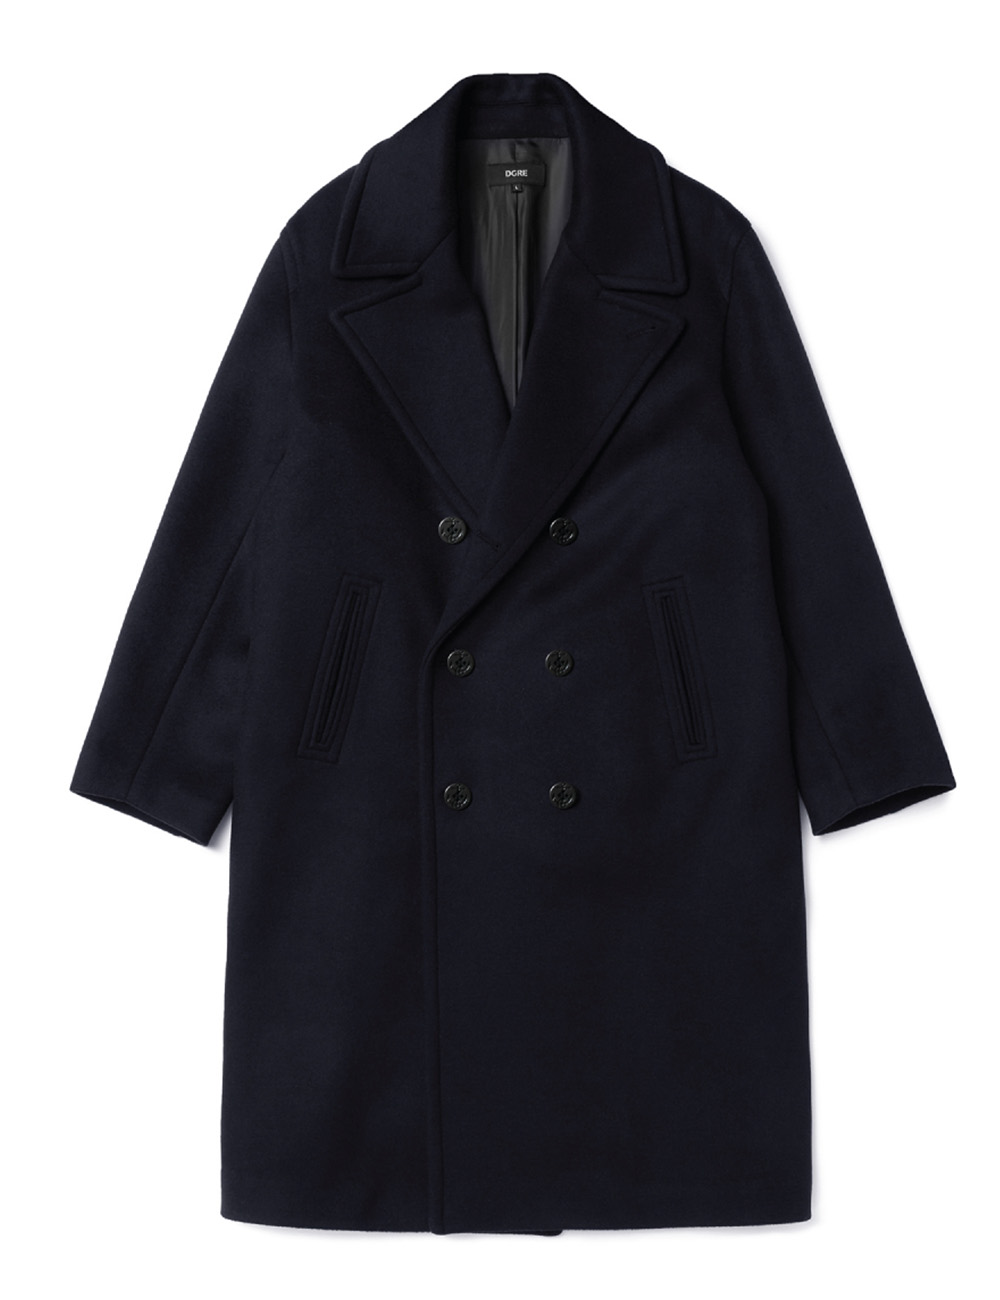 [DGRE] NAVAL COAT NAVY WITH MARINE BUTTON